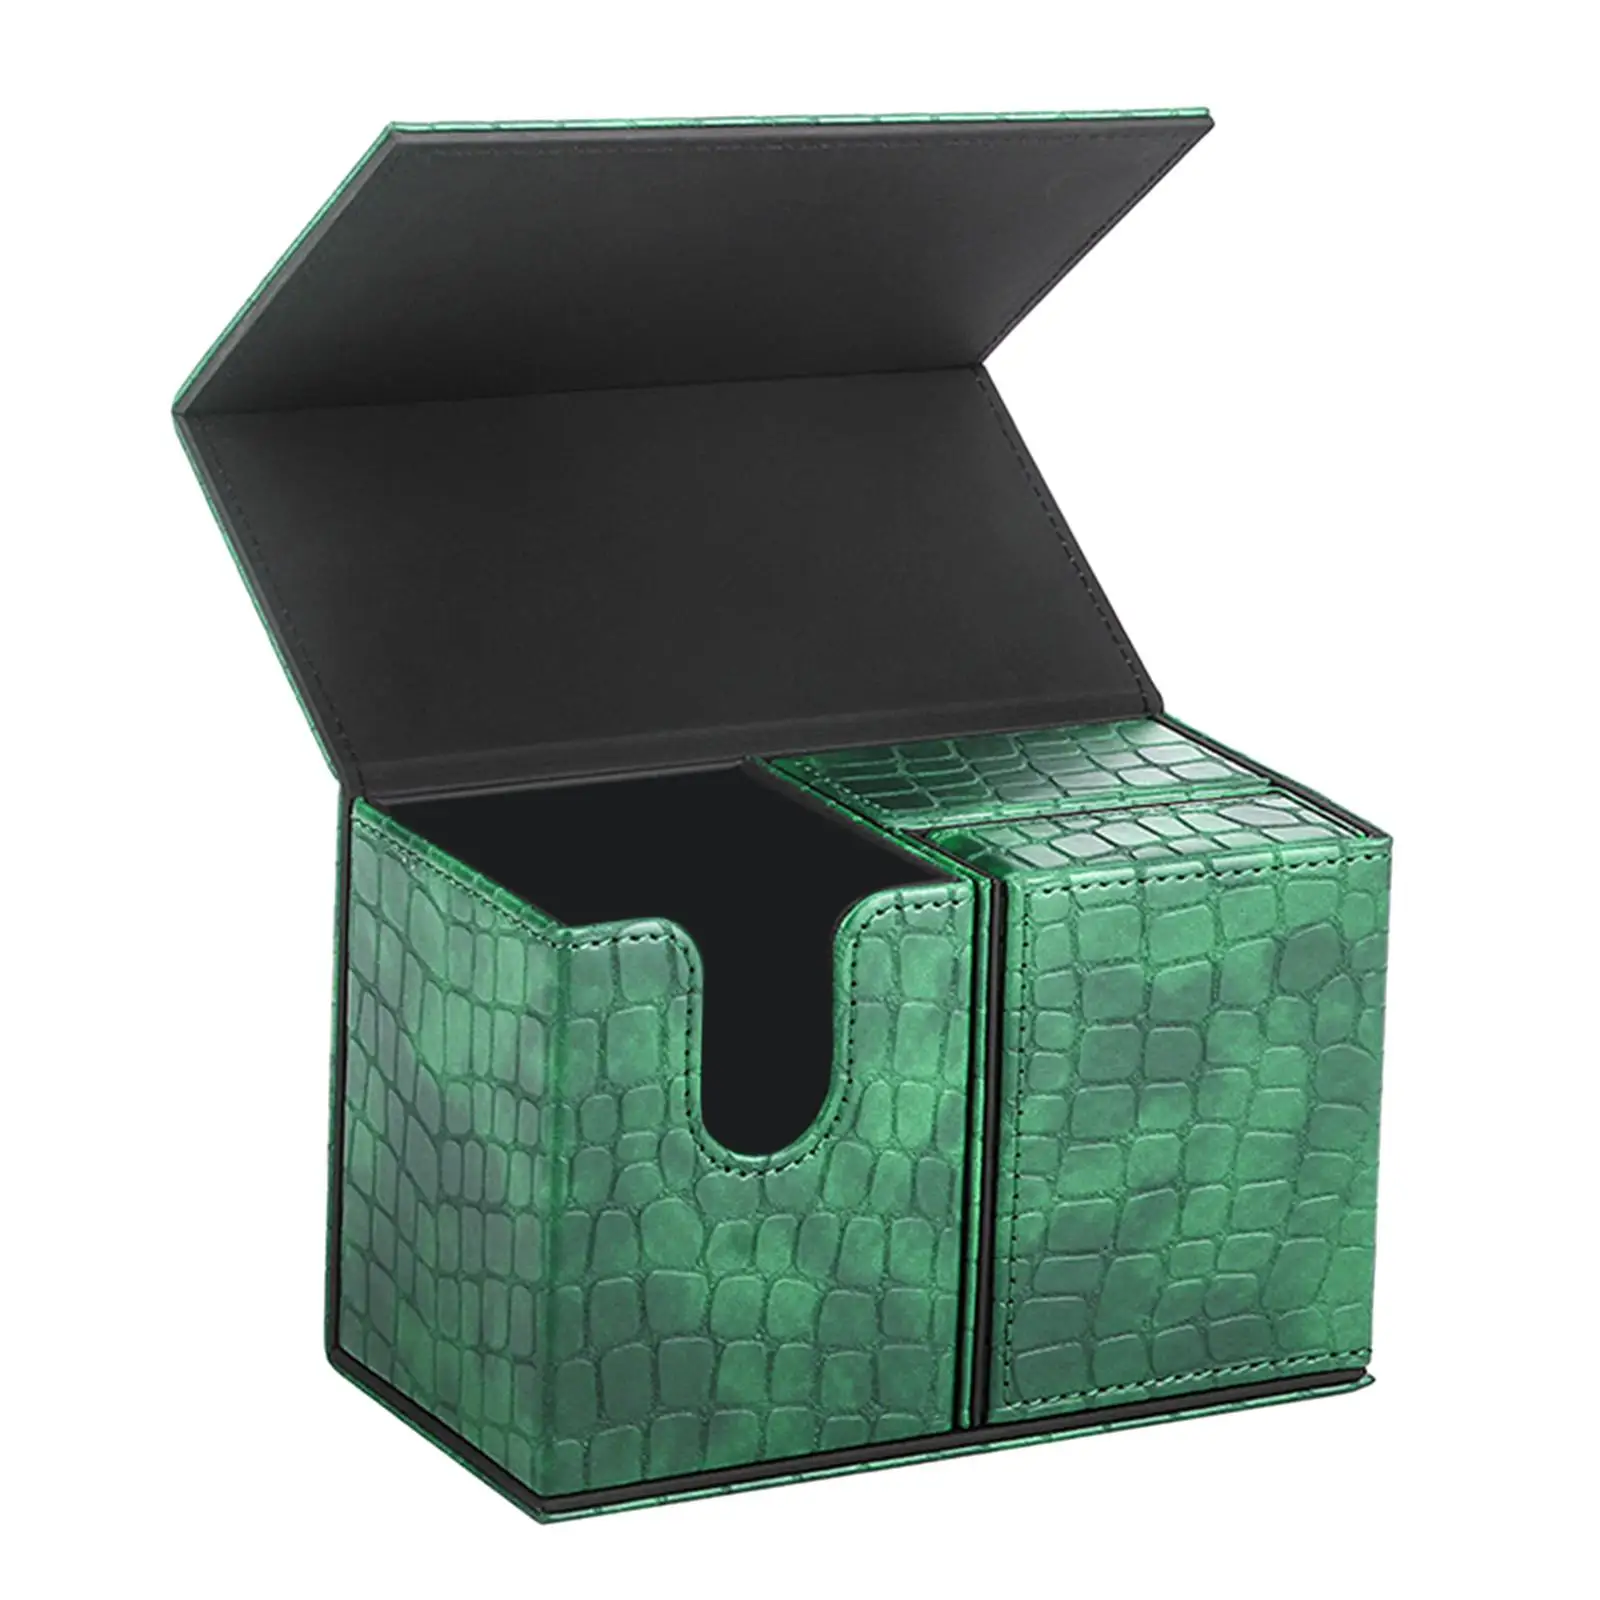 Sturdy Trading Card Deck Box Organizer Holder Case Storage Container for TCG